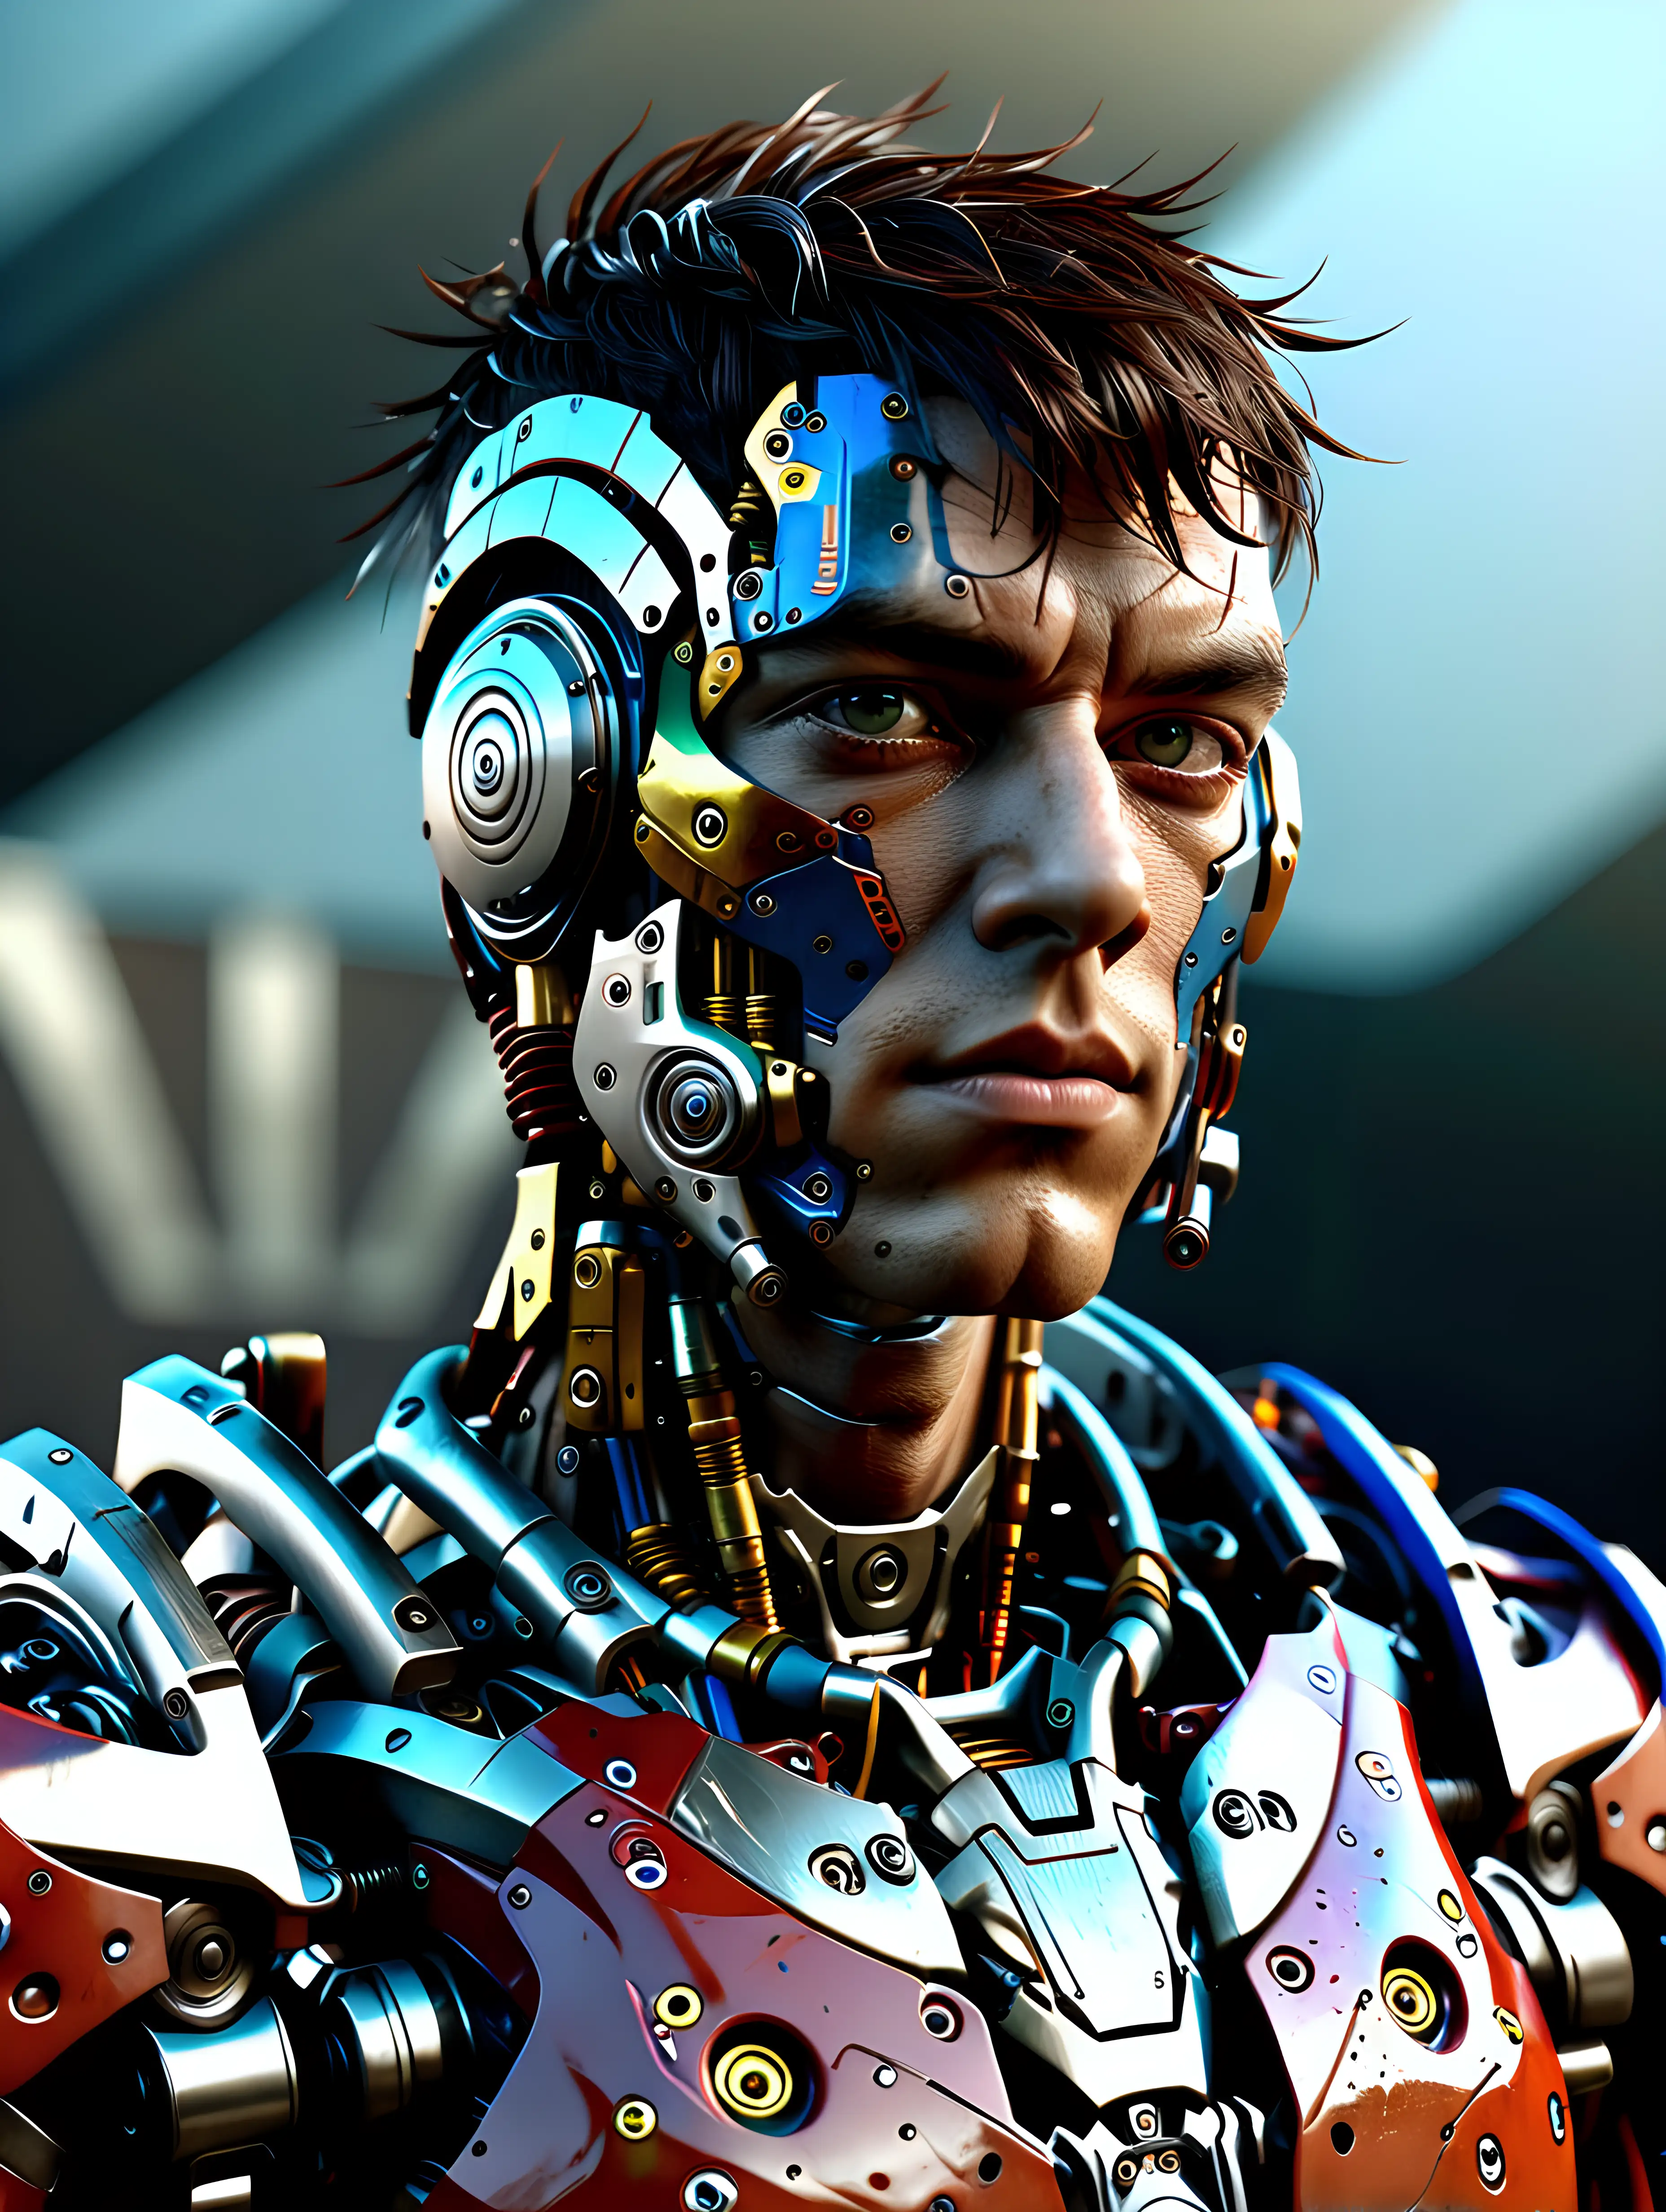 Futuristic Cyborg Warrior High Definition Epic Composition in Colorful Ceramic and Metal